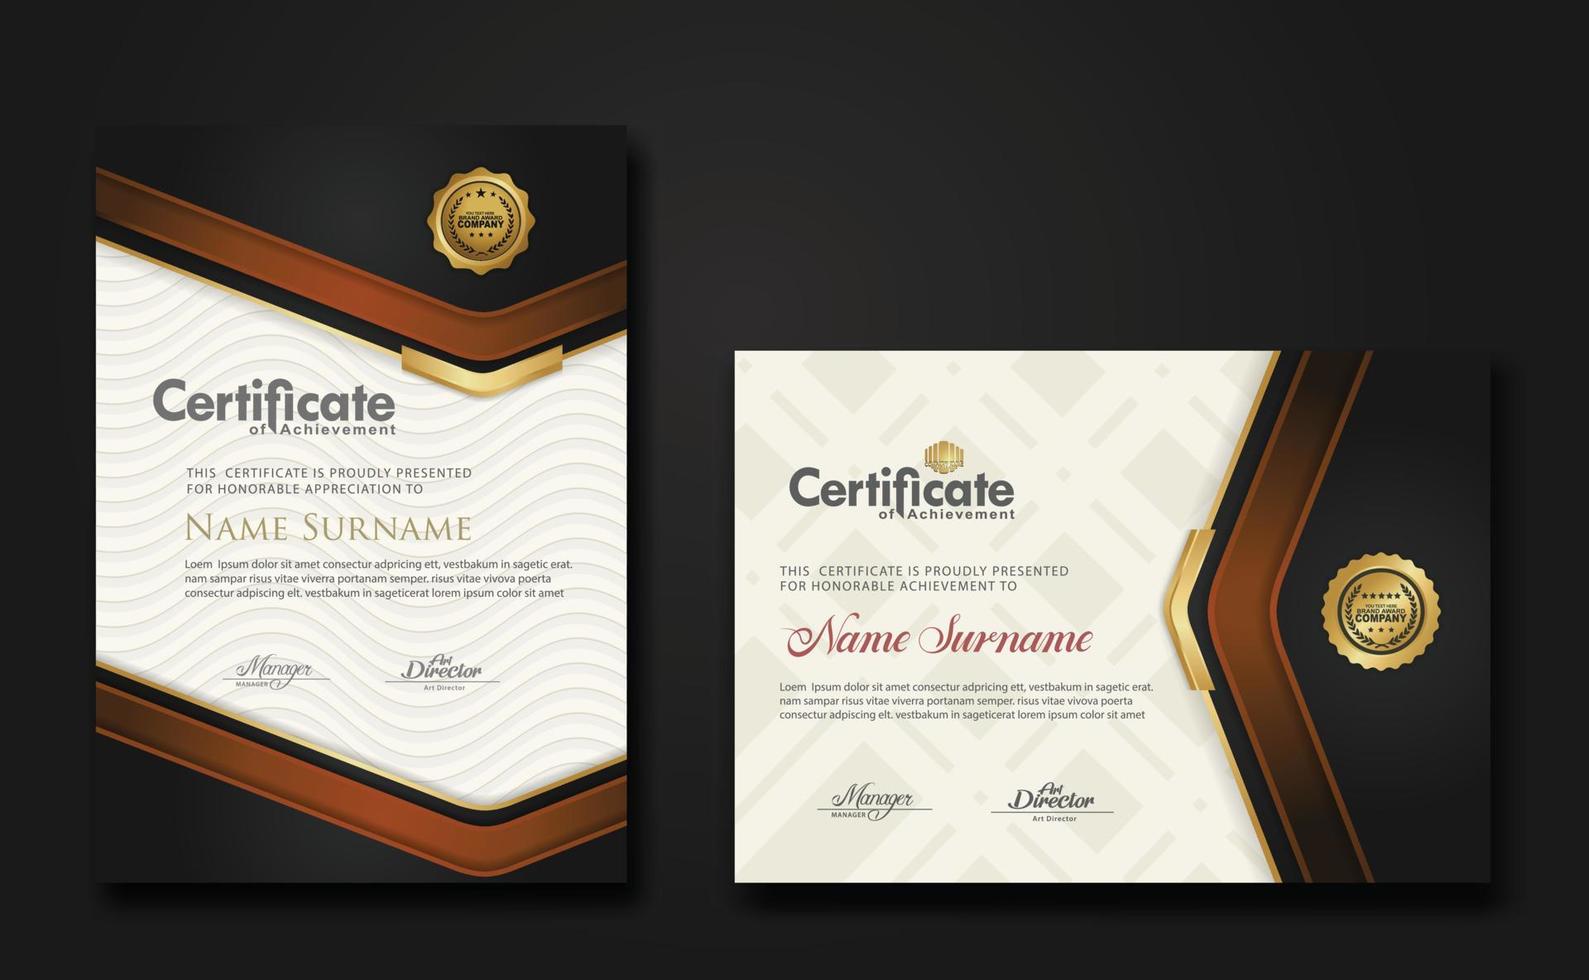 New design two set Luxury Certificate template with shadow effect on overlap layers and cream color on pattern background. For award, business, and education needs. vector illustration